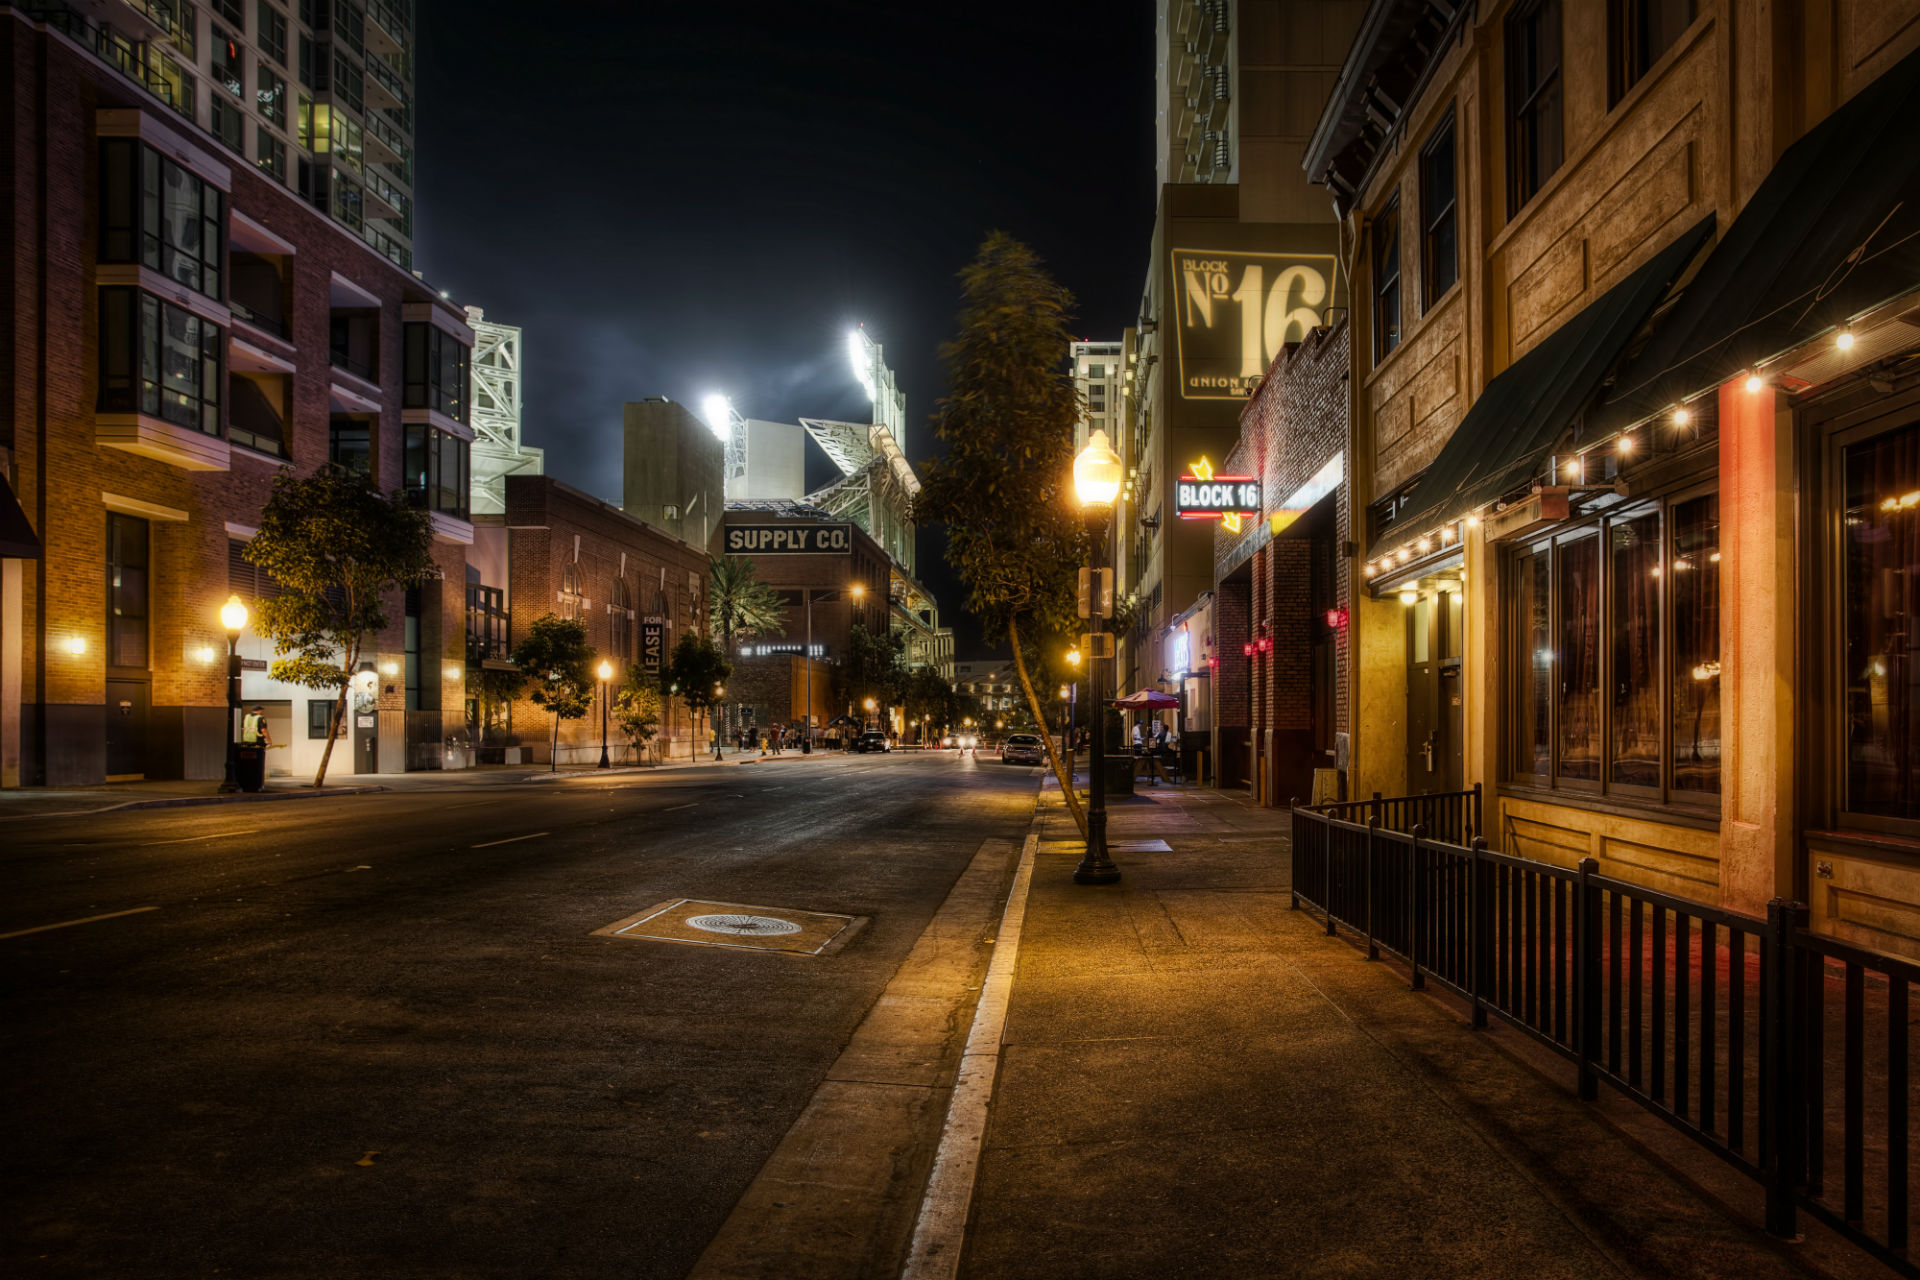 , , 1, A, A, Usa, Roads, San, Diego, Night, Street, Lights, Pavement, Street, Hdr, Architecture, Buildings, Night, Lights, Shops Wallpaper